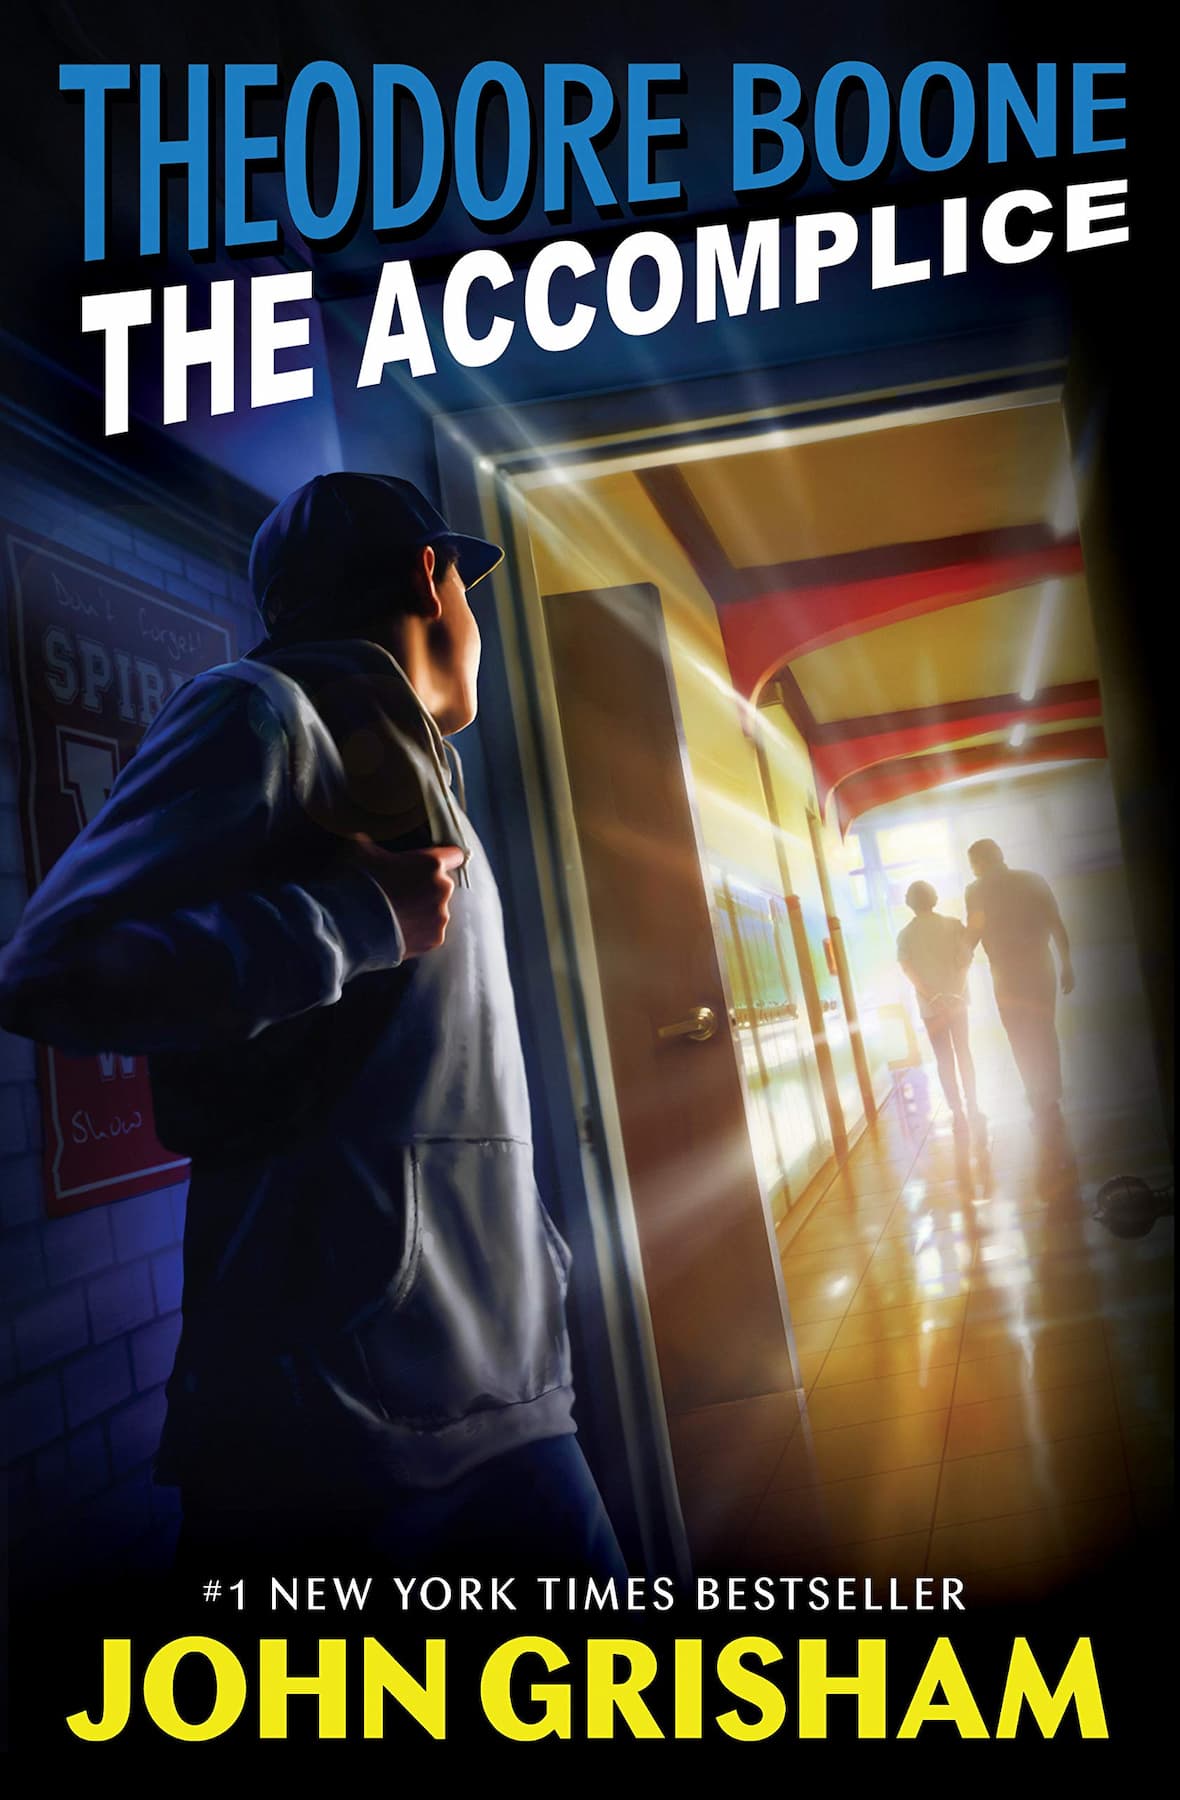 The Accomplice - John Grisham (Theodore Boone Series Book 7) can be a great help to those who seek to recharge their energy levels during the holidays.